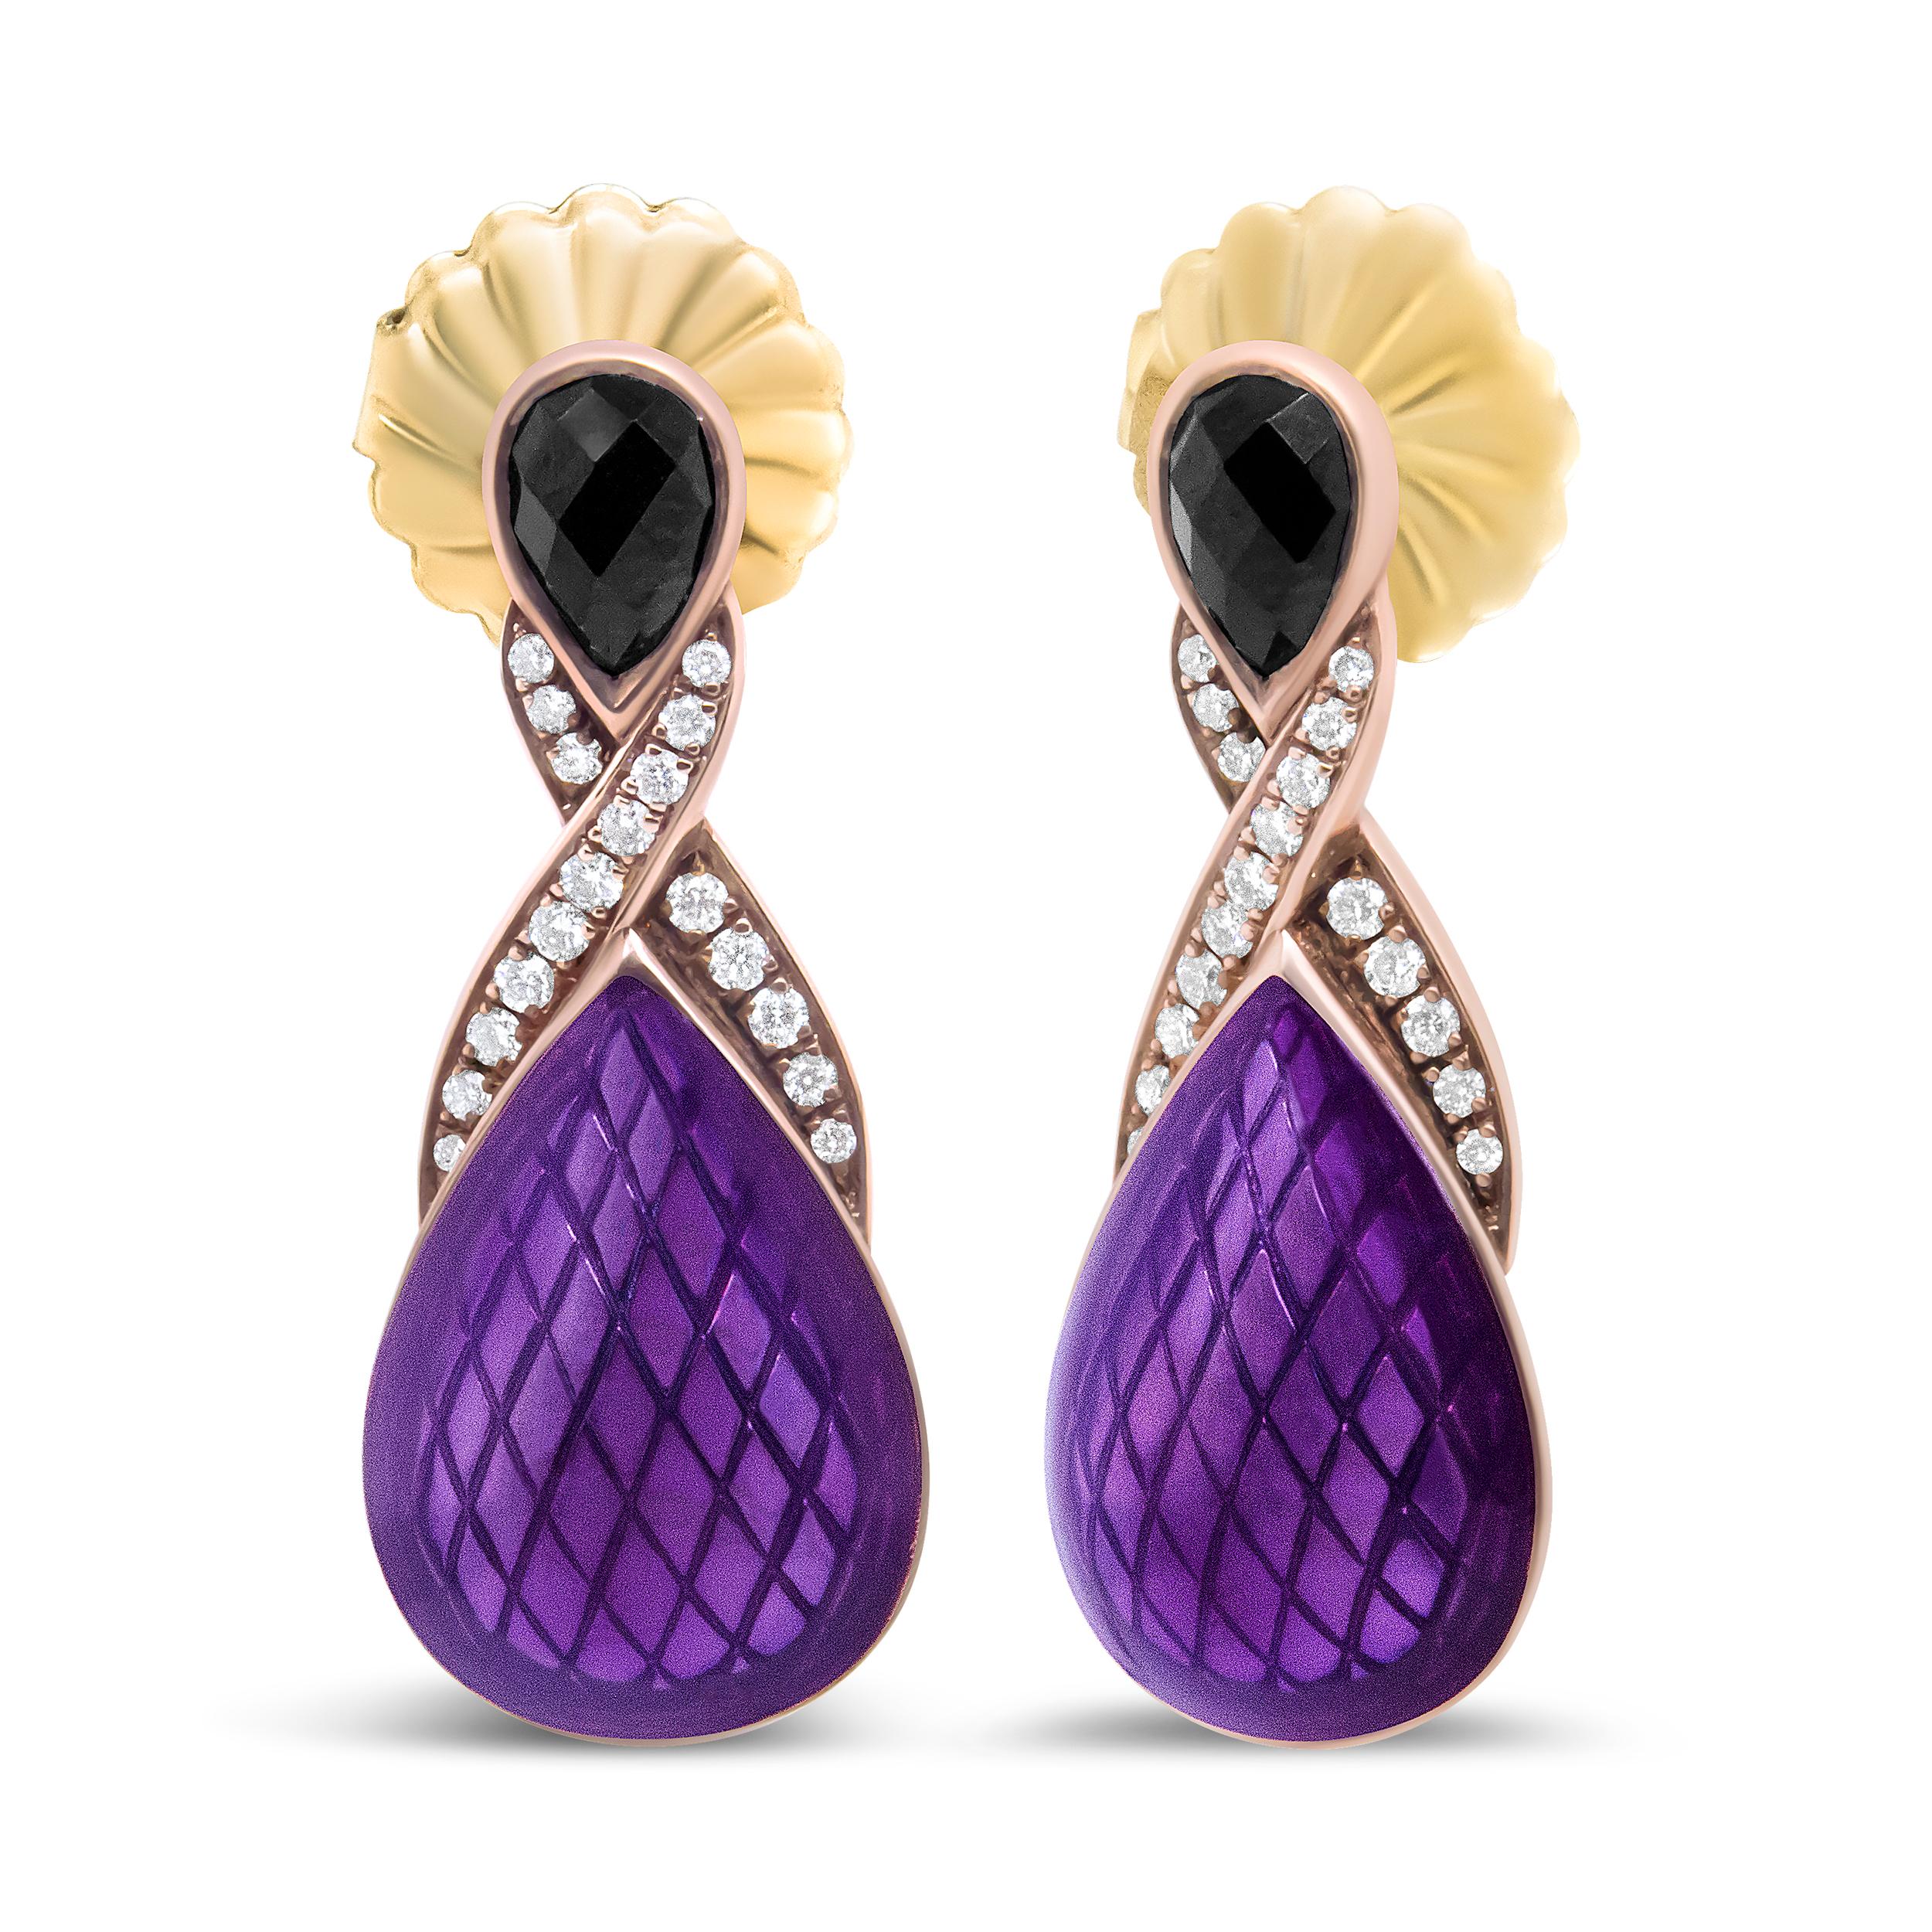 The detail in this pair of 18k rose gold flash plated .925 sterling silver drop earrings is outstanding! The upper dangle is set with the mysterious air of a natural color-treated black onyx in a 5.5 x 4mm pear shape. From this stone, the precious